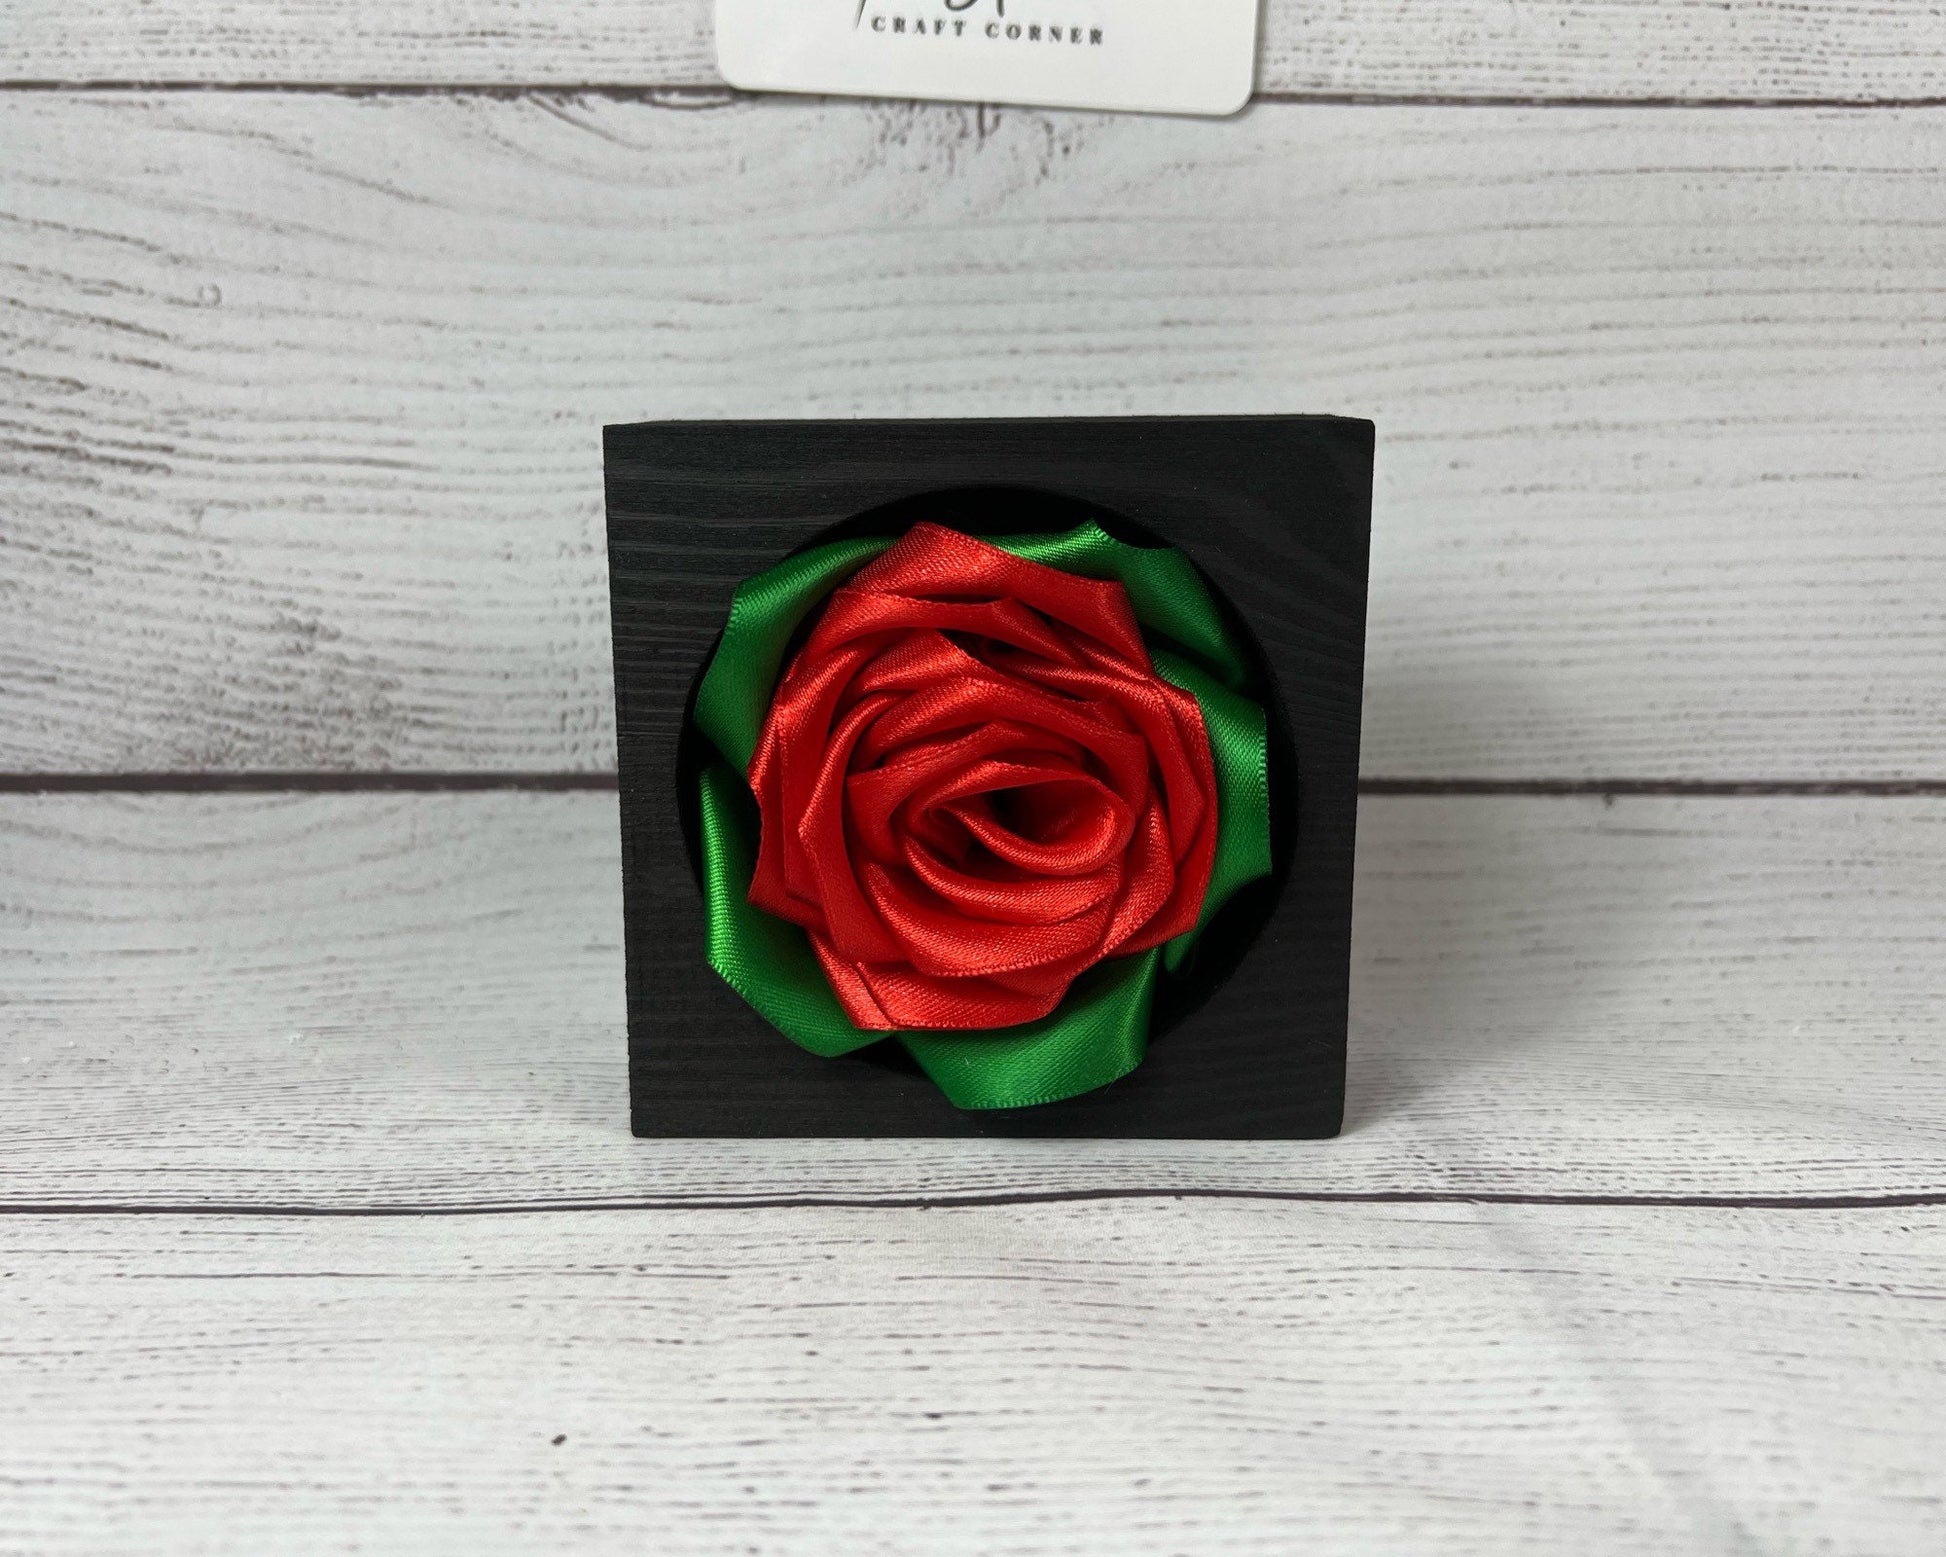 Ribbon Rose Wood Piece - Handmade - Red Rose - Valentine's Day - Love - Sustainable Flower - Unique - Gift Ideas - Stocking Stuffer - Pretty